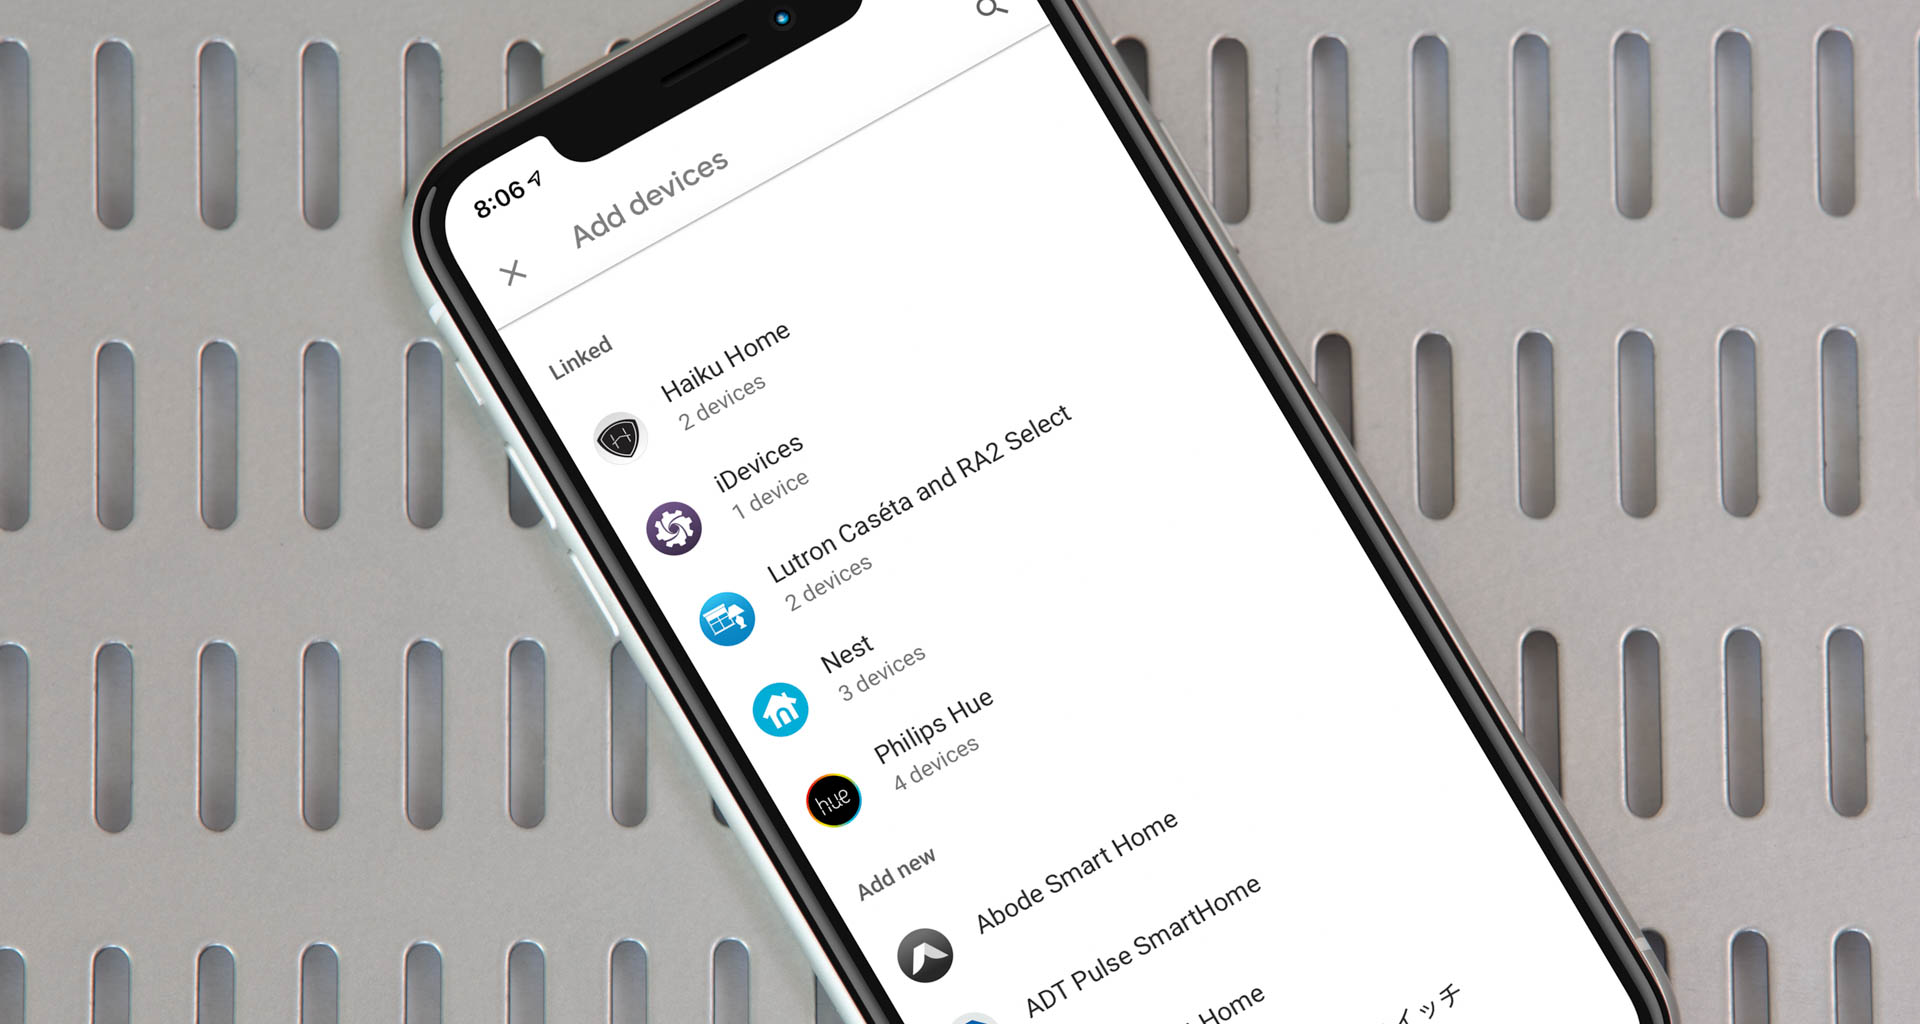 Once Google Assistant is fully activated for Haiku Home products, you should see Haiku Home listed in the Linked section of the Google Home app. Image: Digitized House Media.